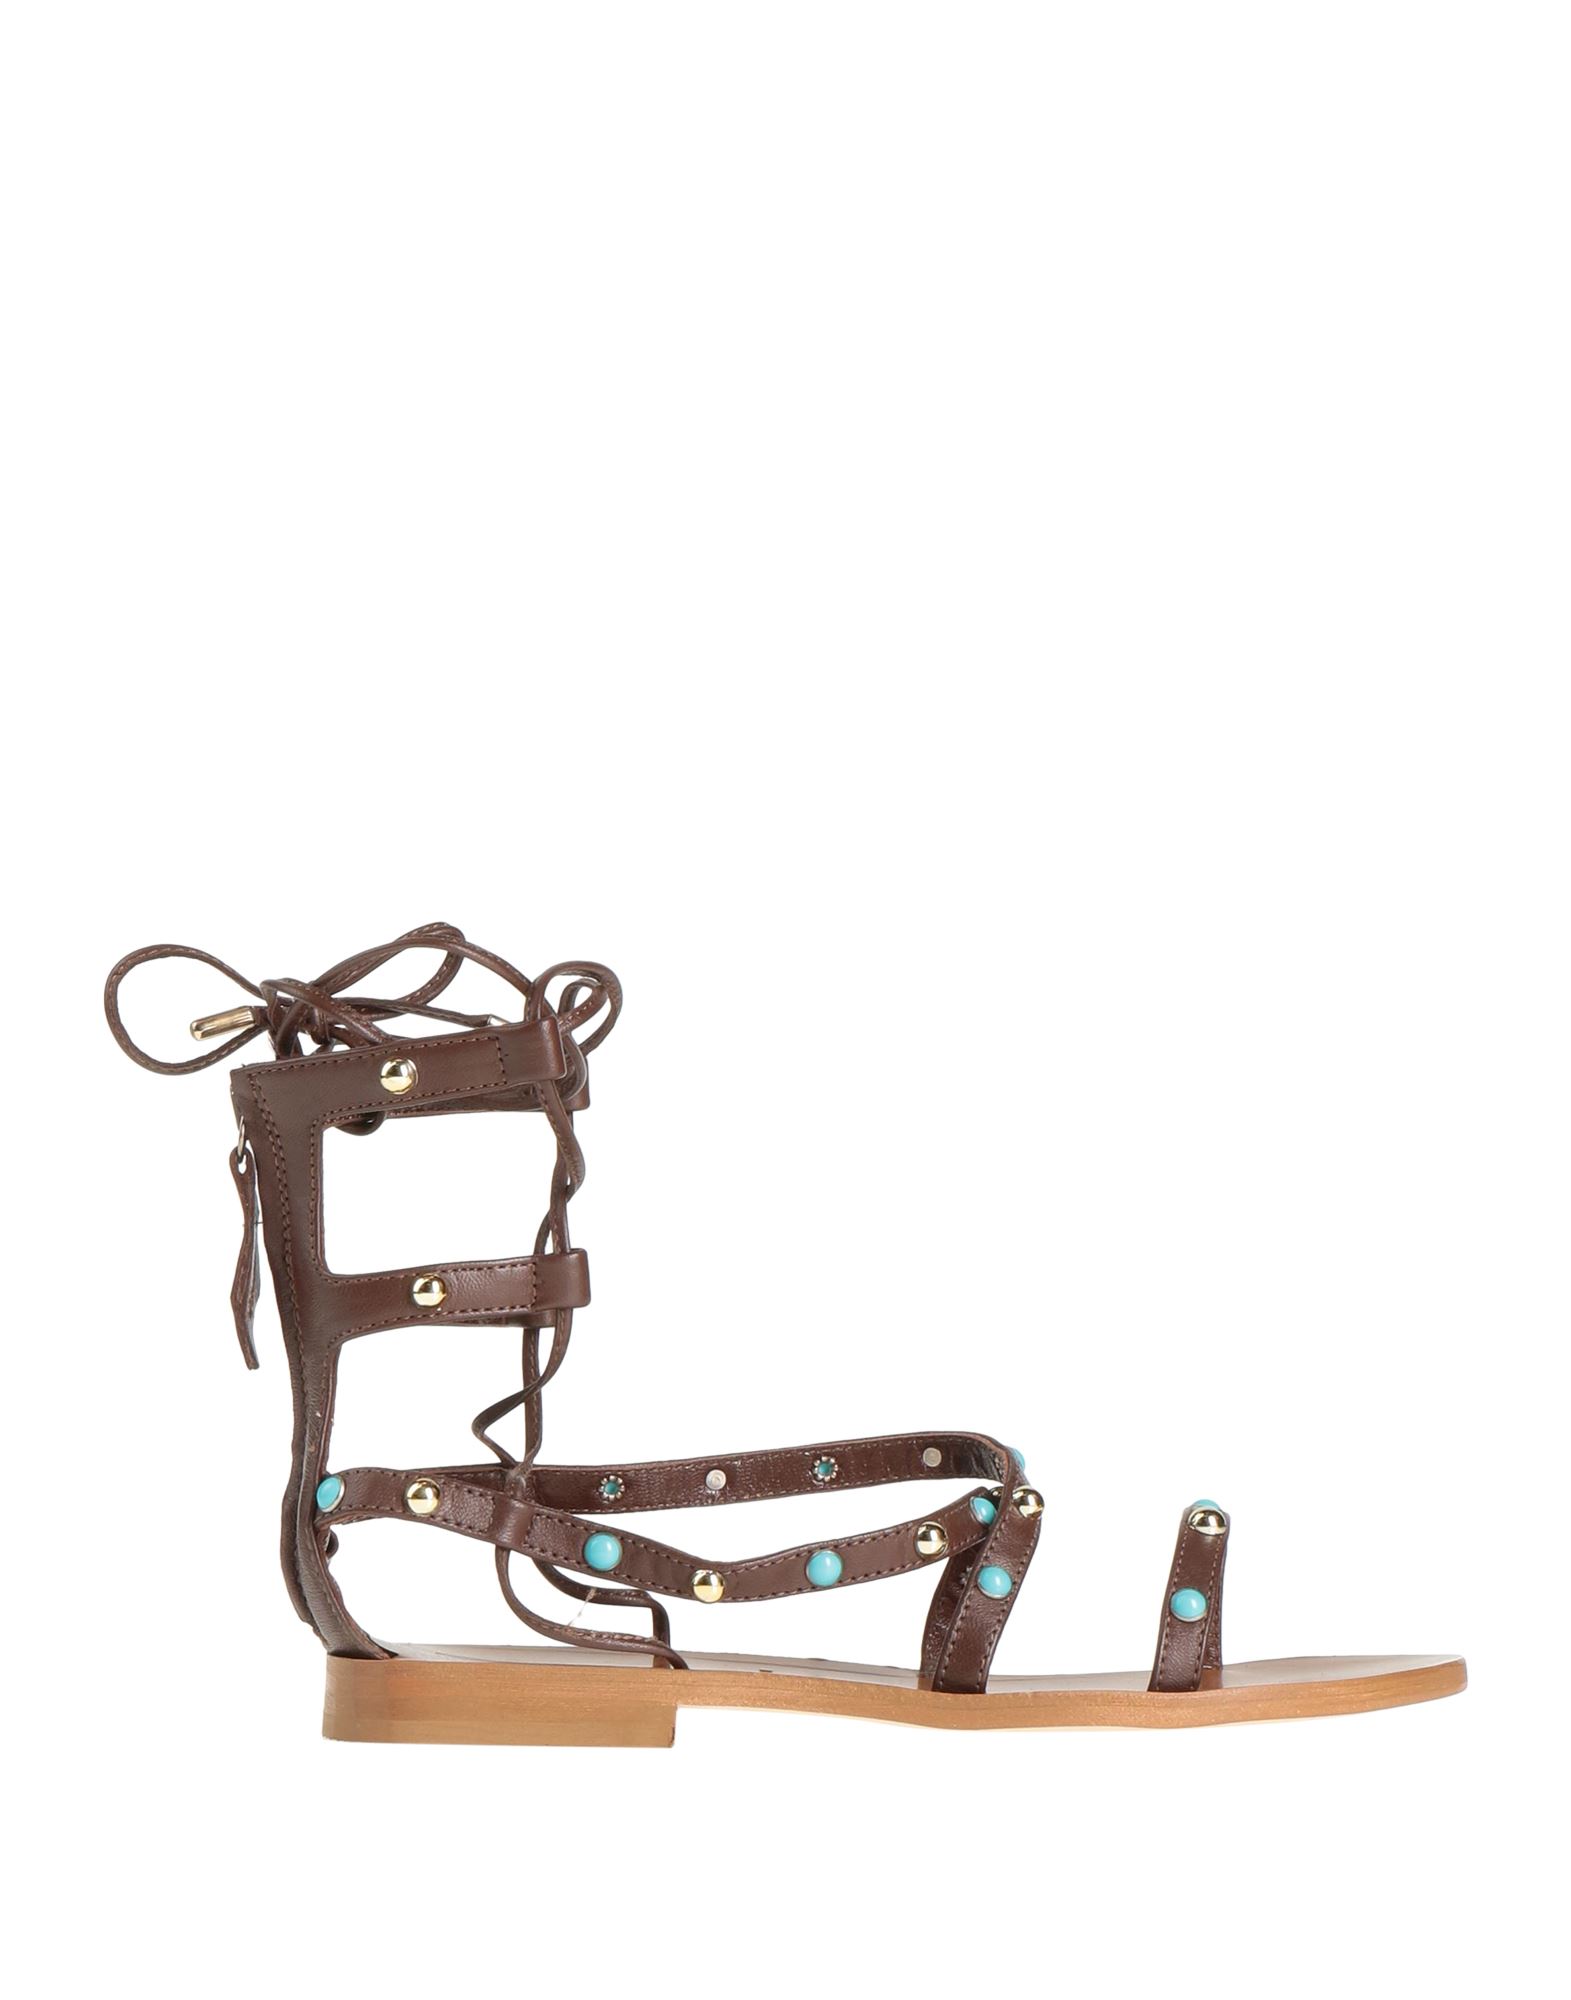 Ncub Sandals In Brown